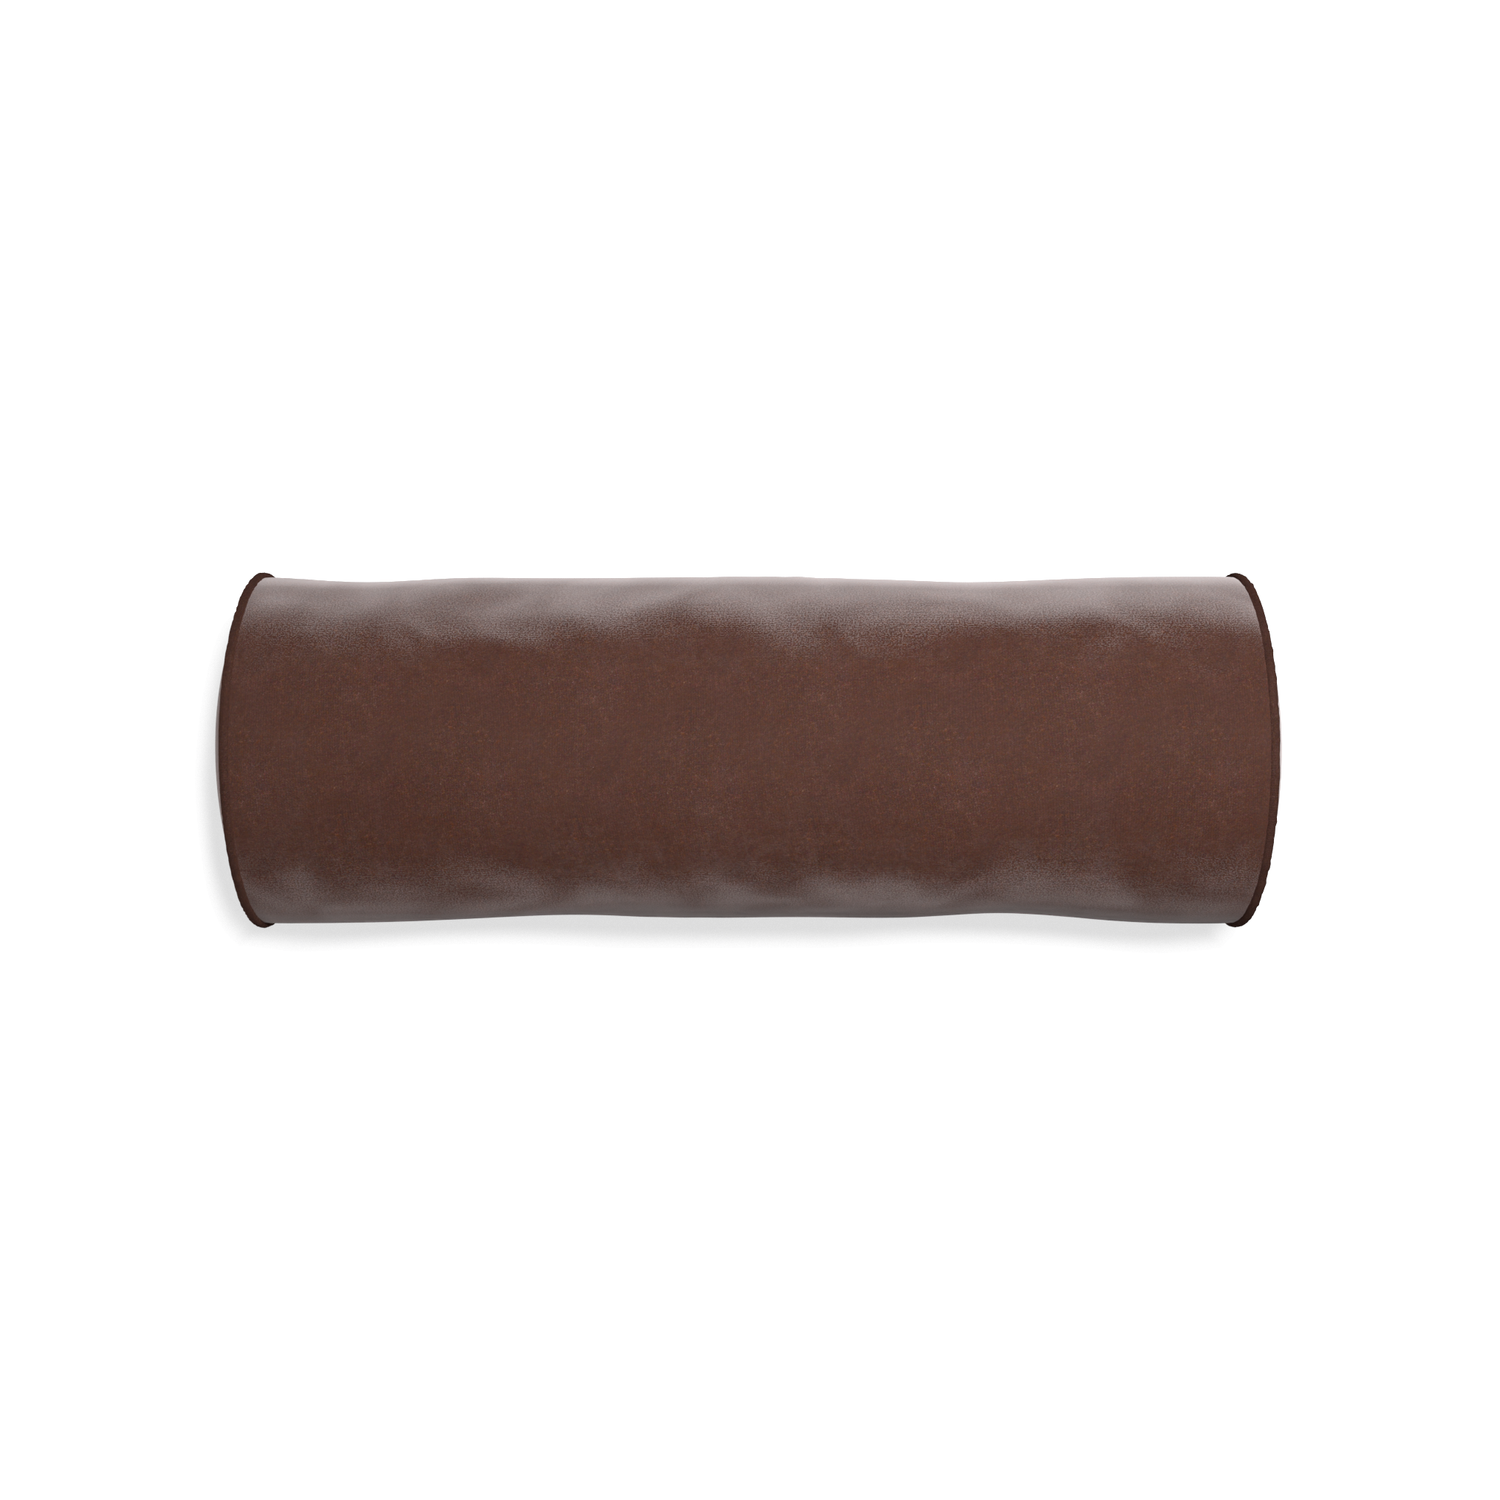 bolster brown velvet pillow with brown piping